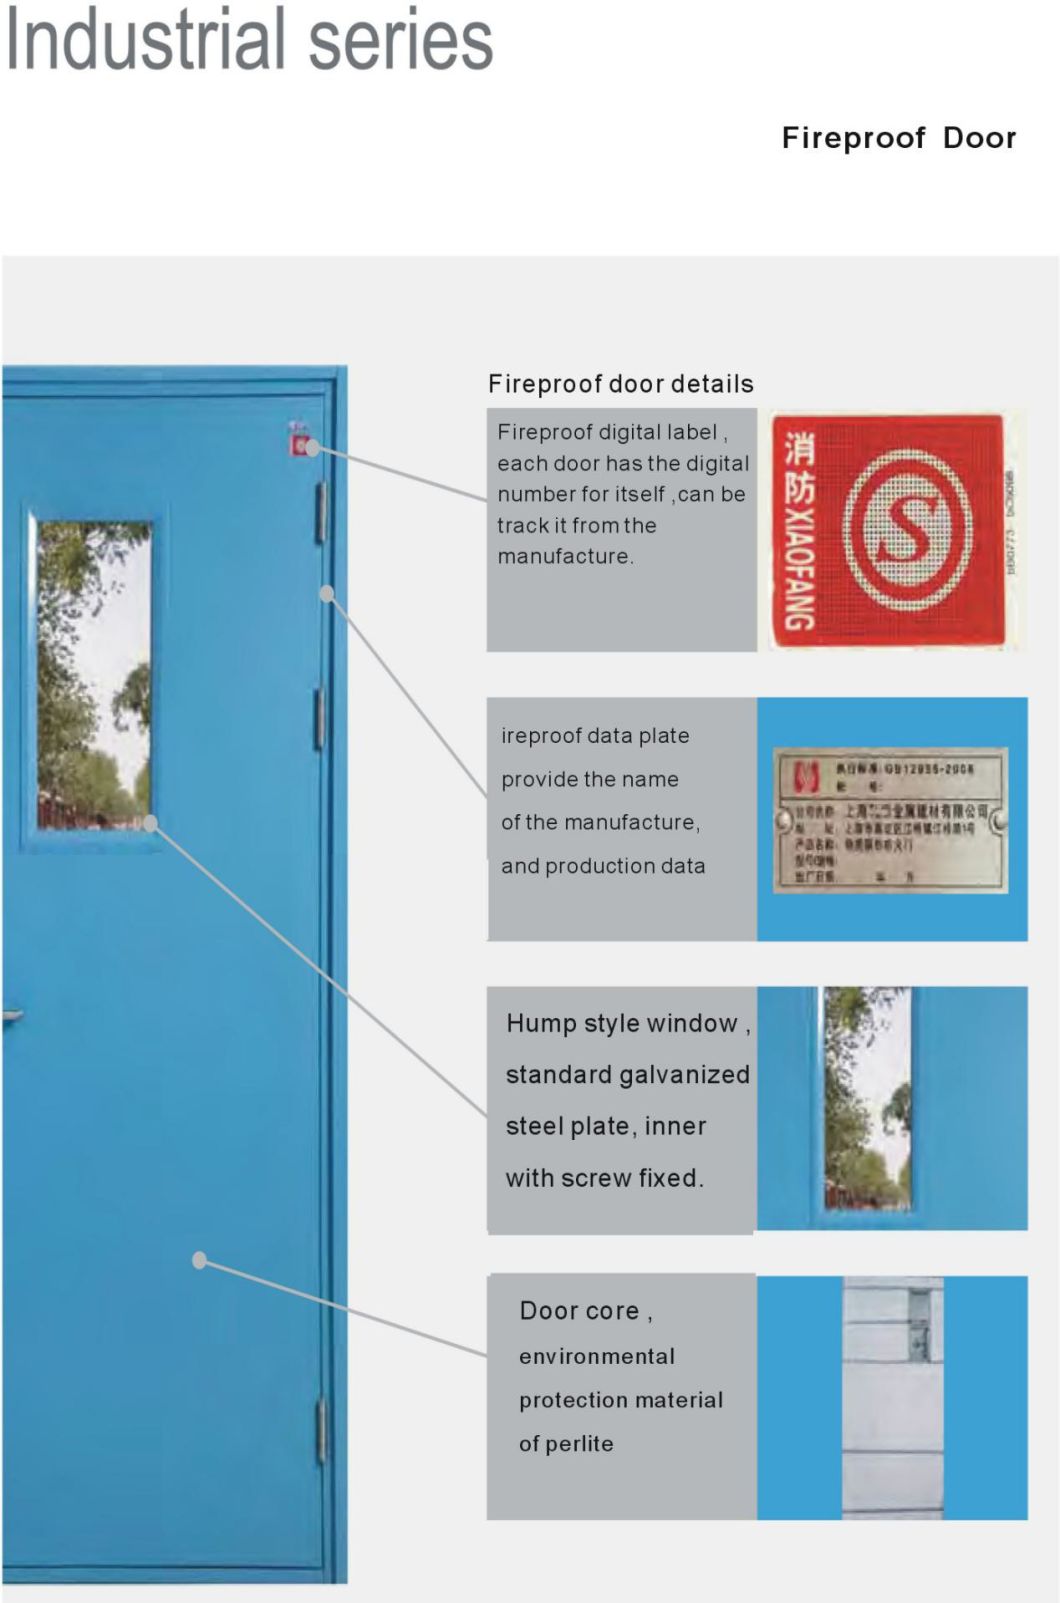 Industry Interior Fire Prevention Fireproof Entry Steel Fire Emergency Safety Door